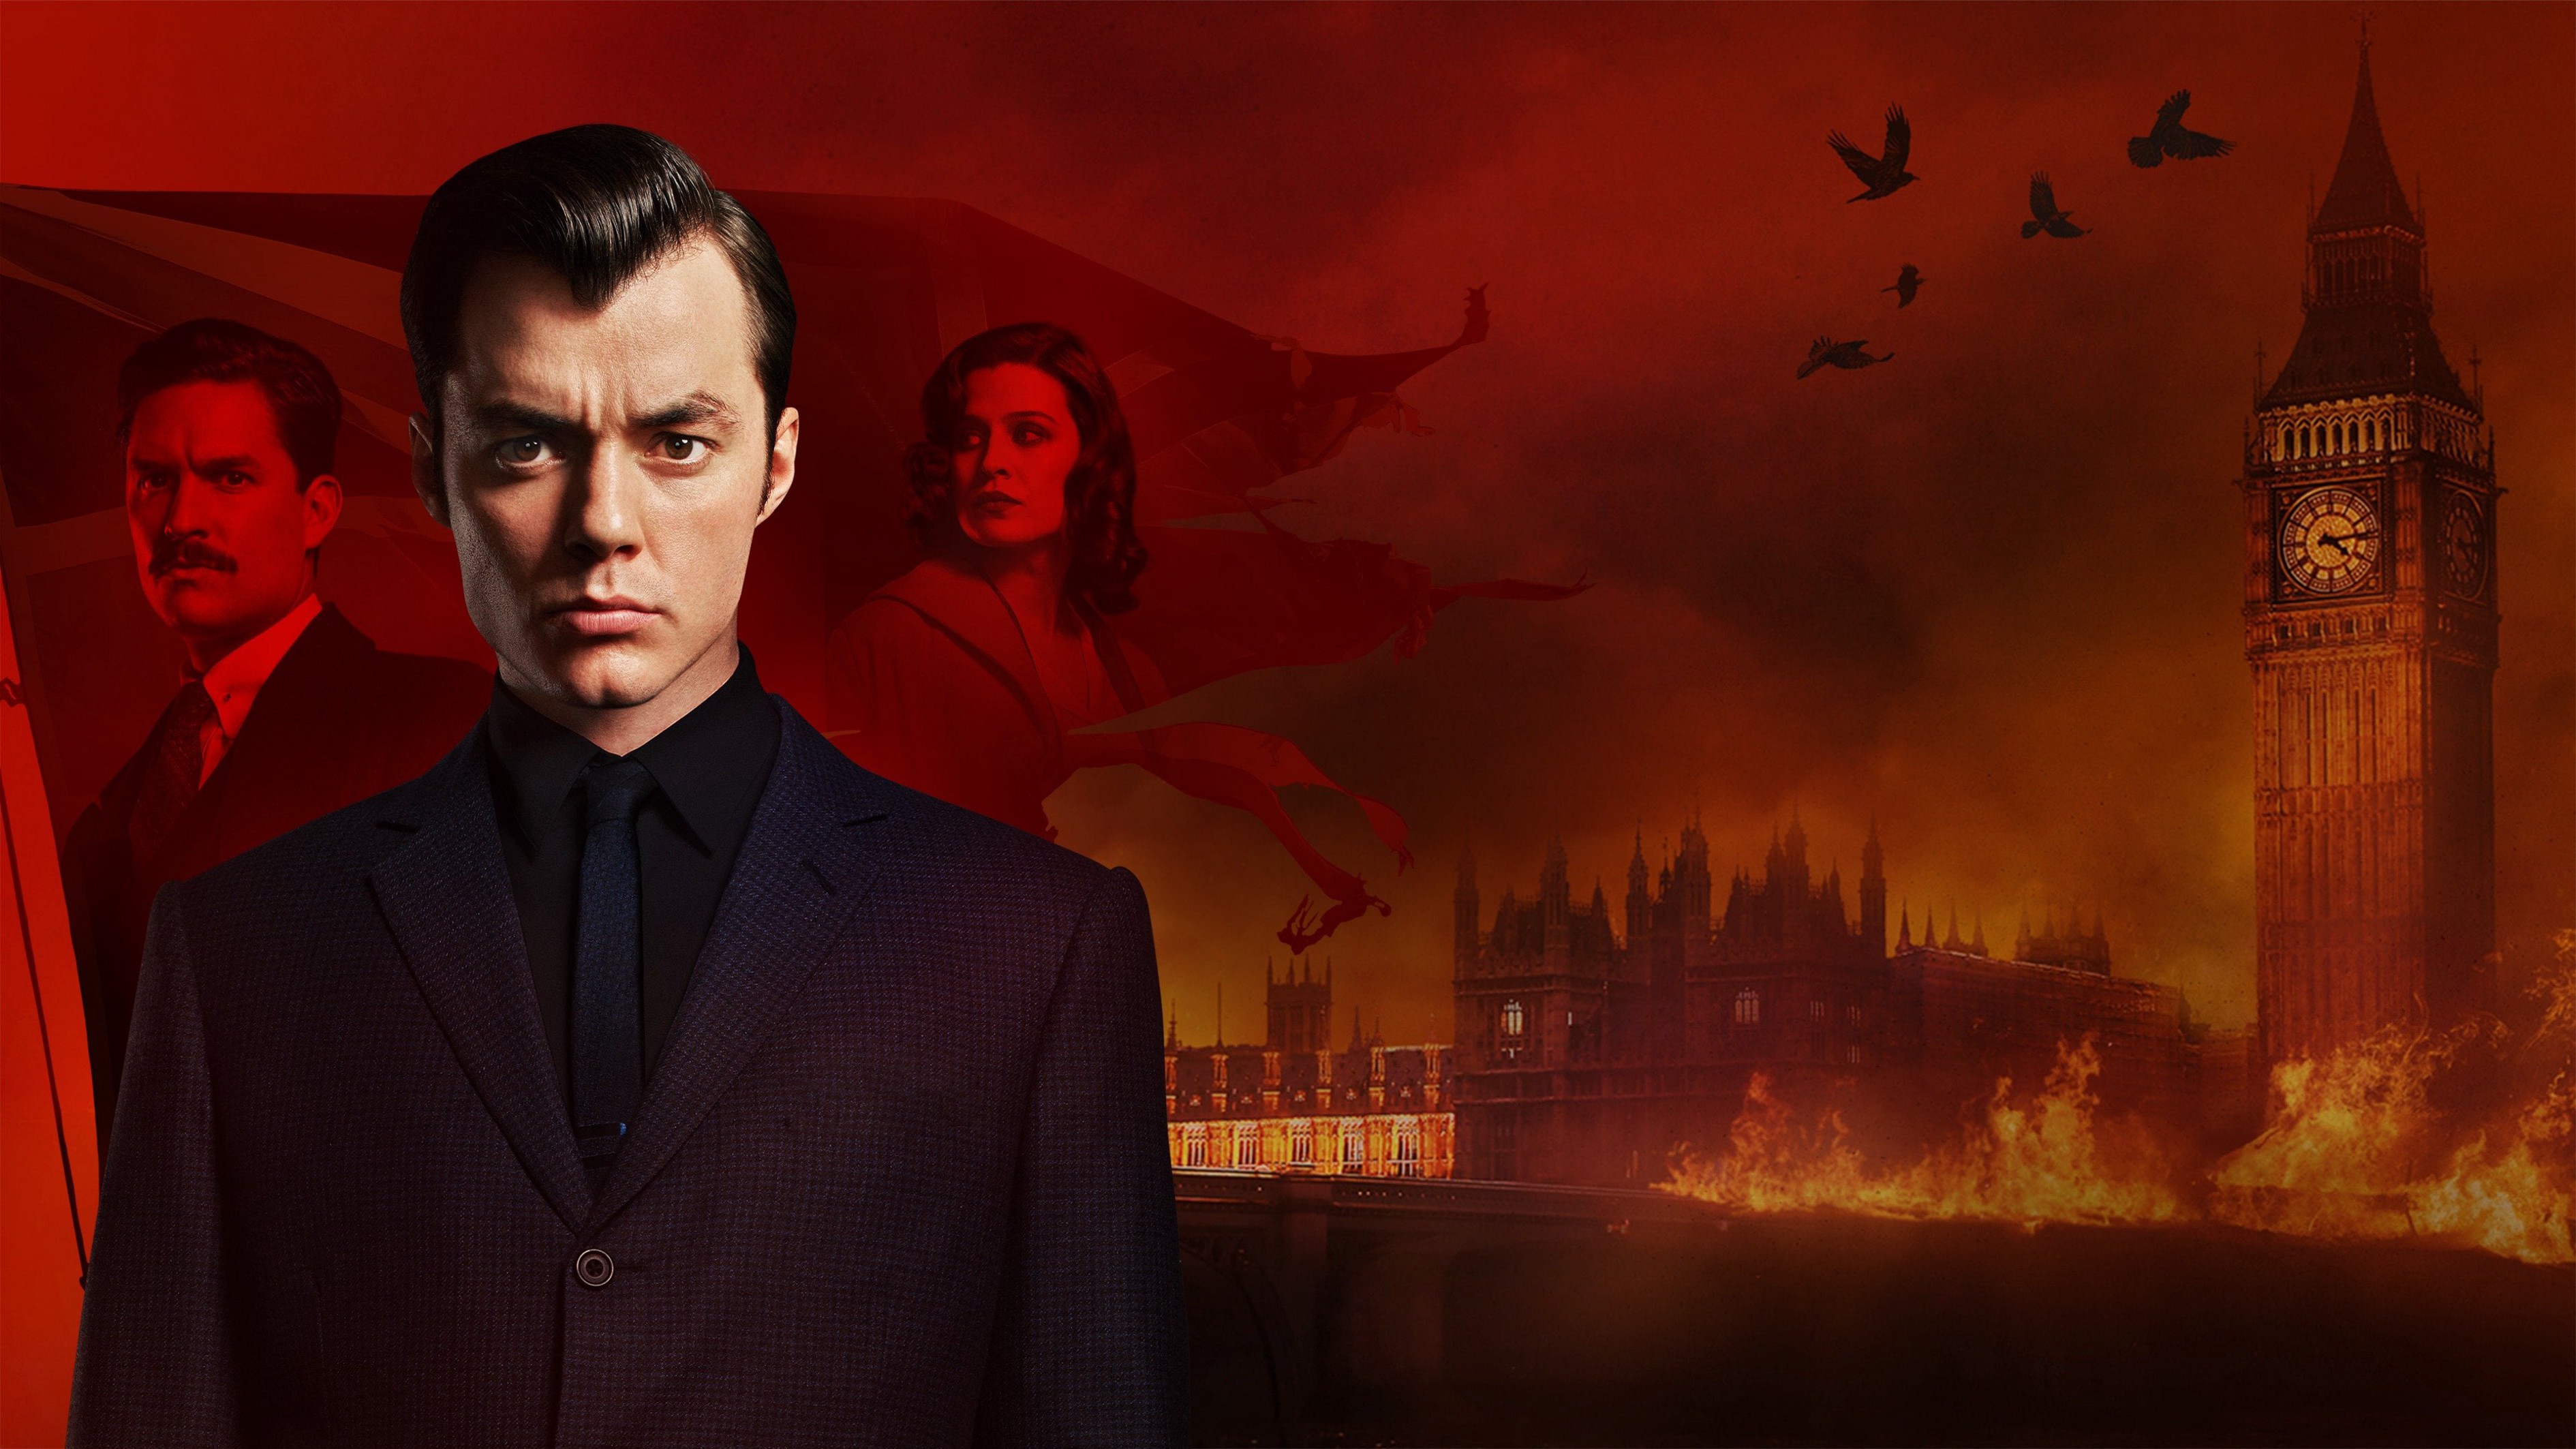 TV Show Pennyworth HD Wallpaper | Background Image